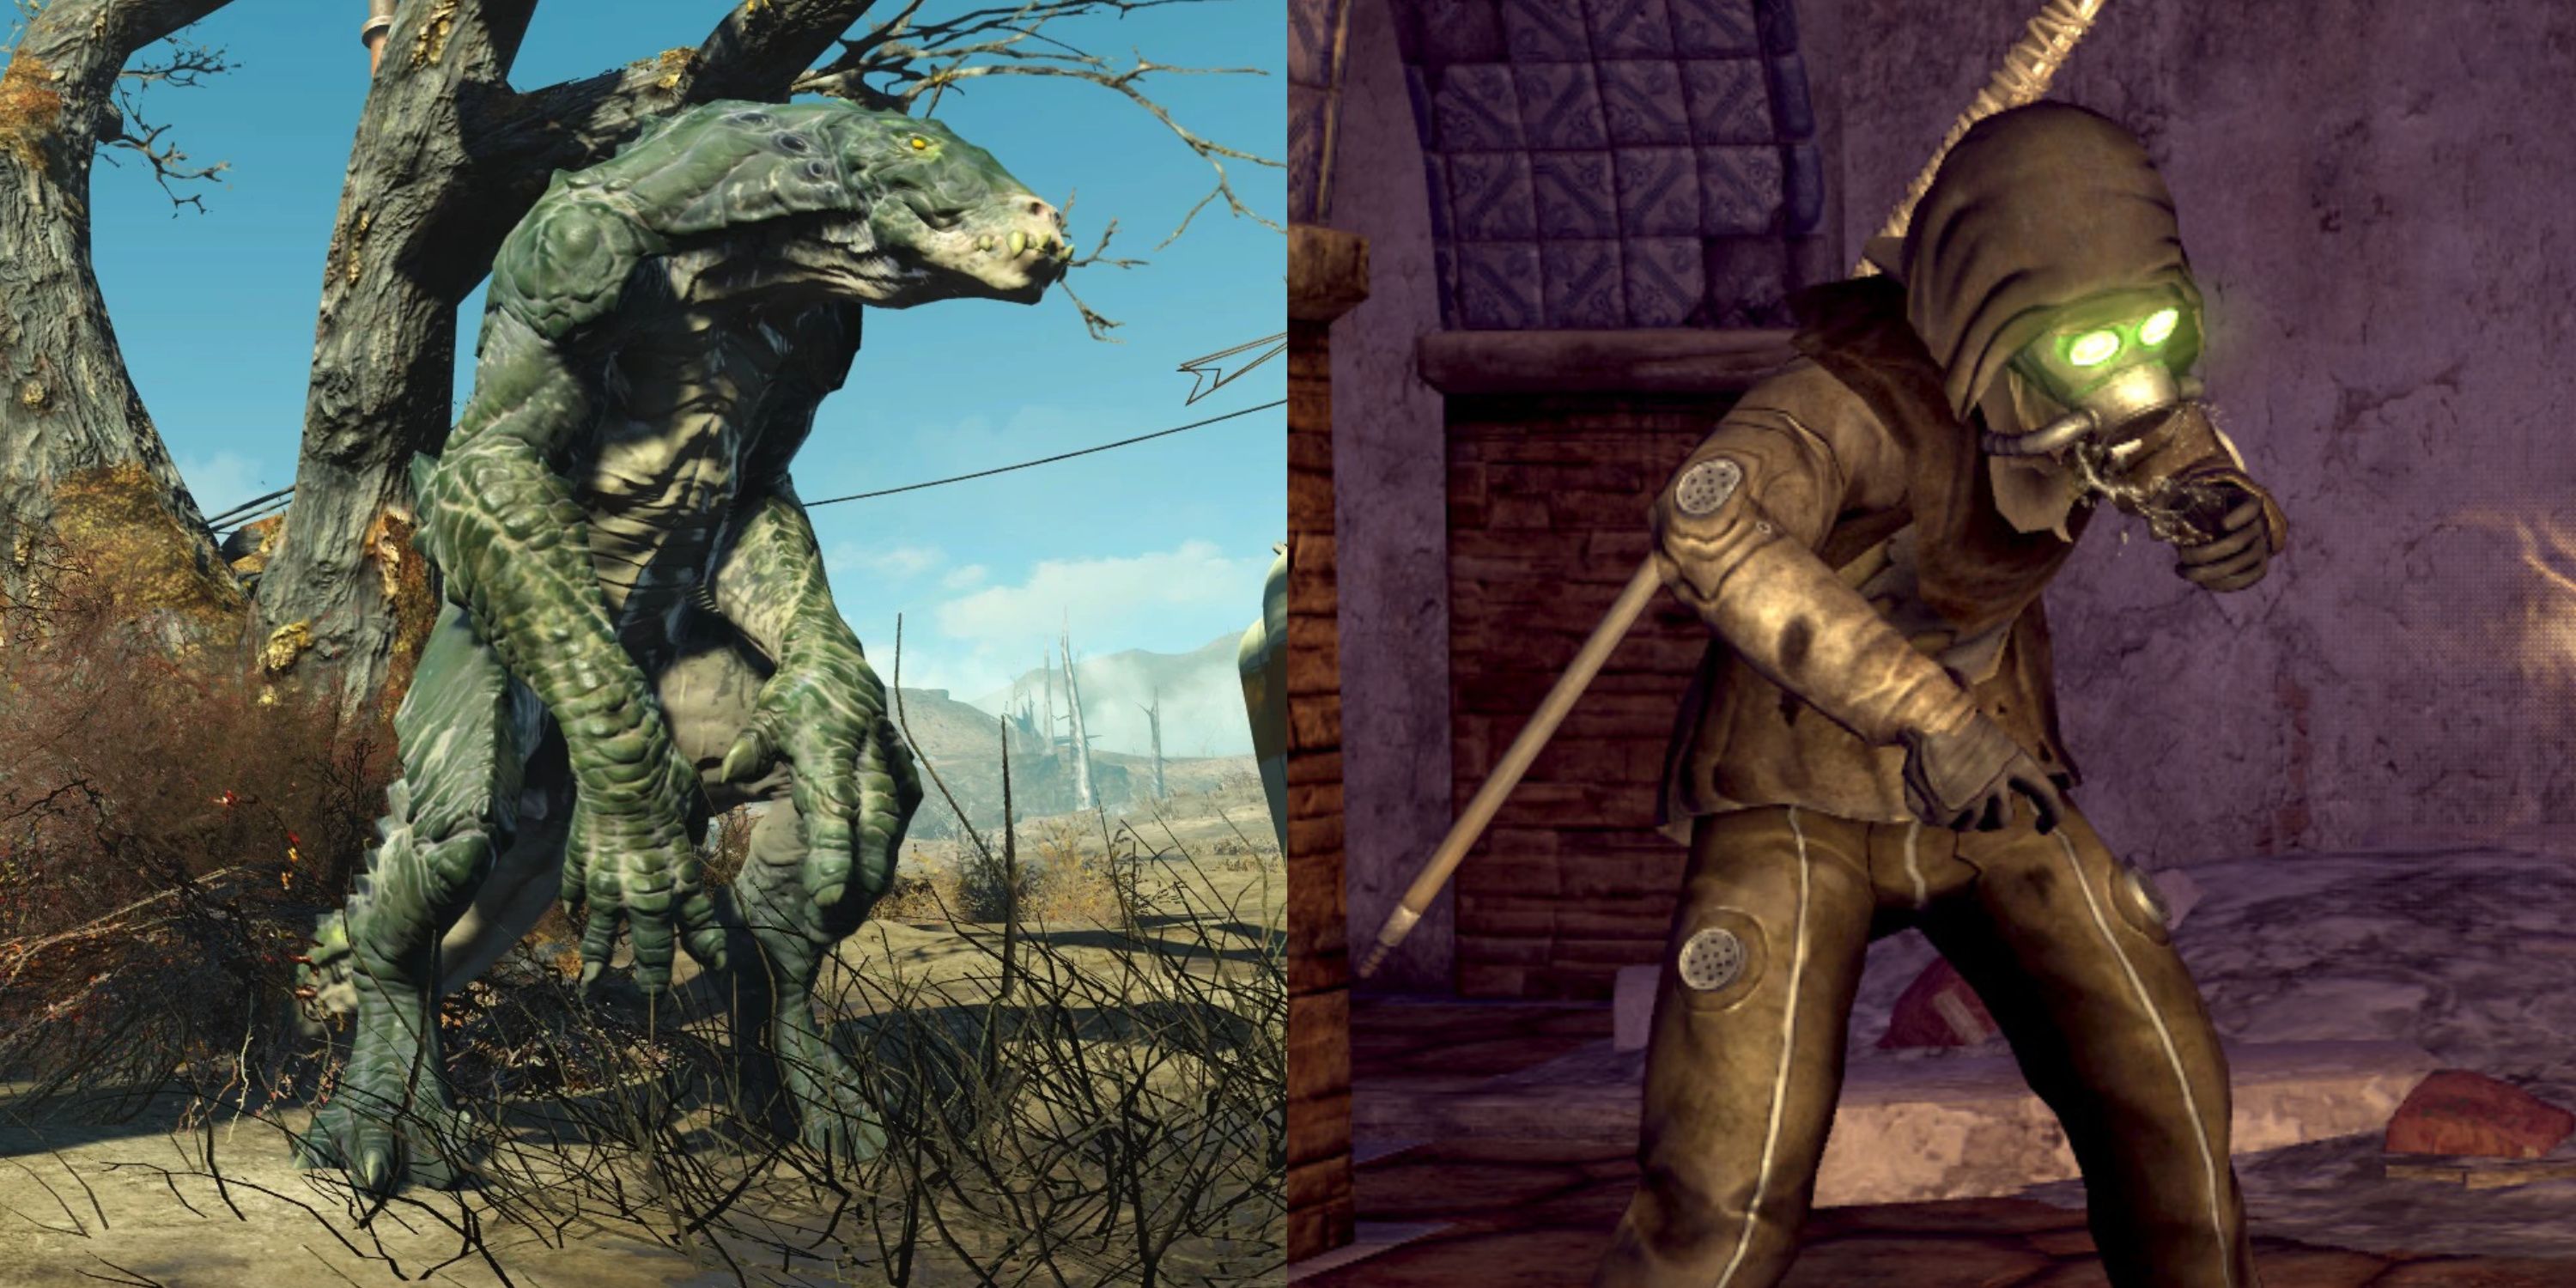 A Gatorclaw from Fallout 4: Nuka World next to a Ghost Person from Fallout New Vegas: Dead Money